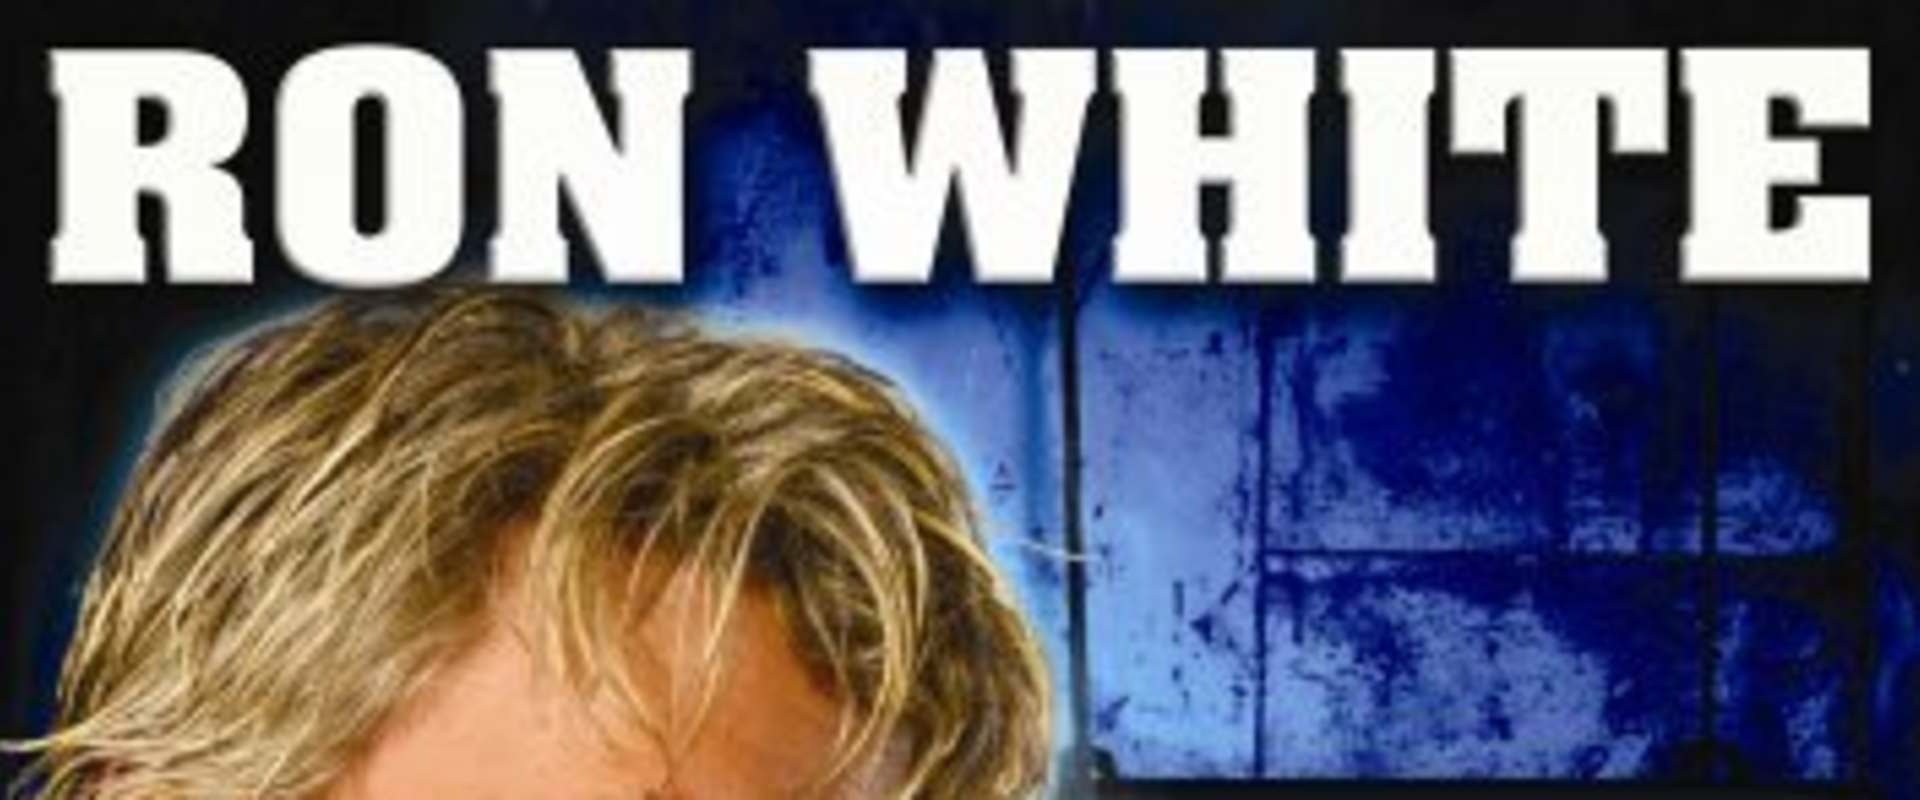 Ron White: You Can't Fix Stupid background 1